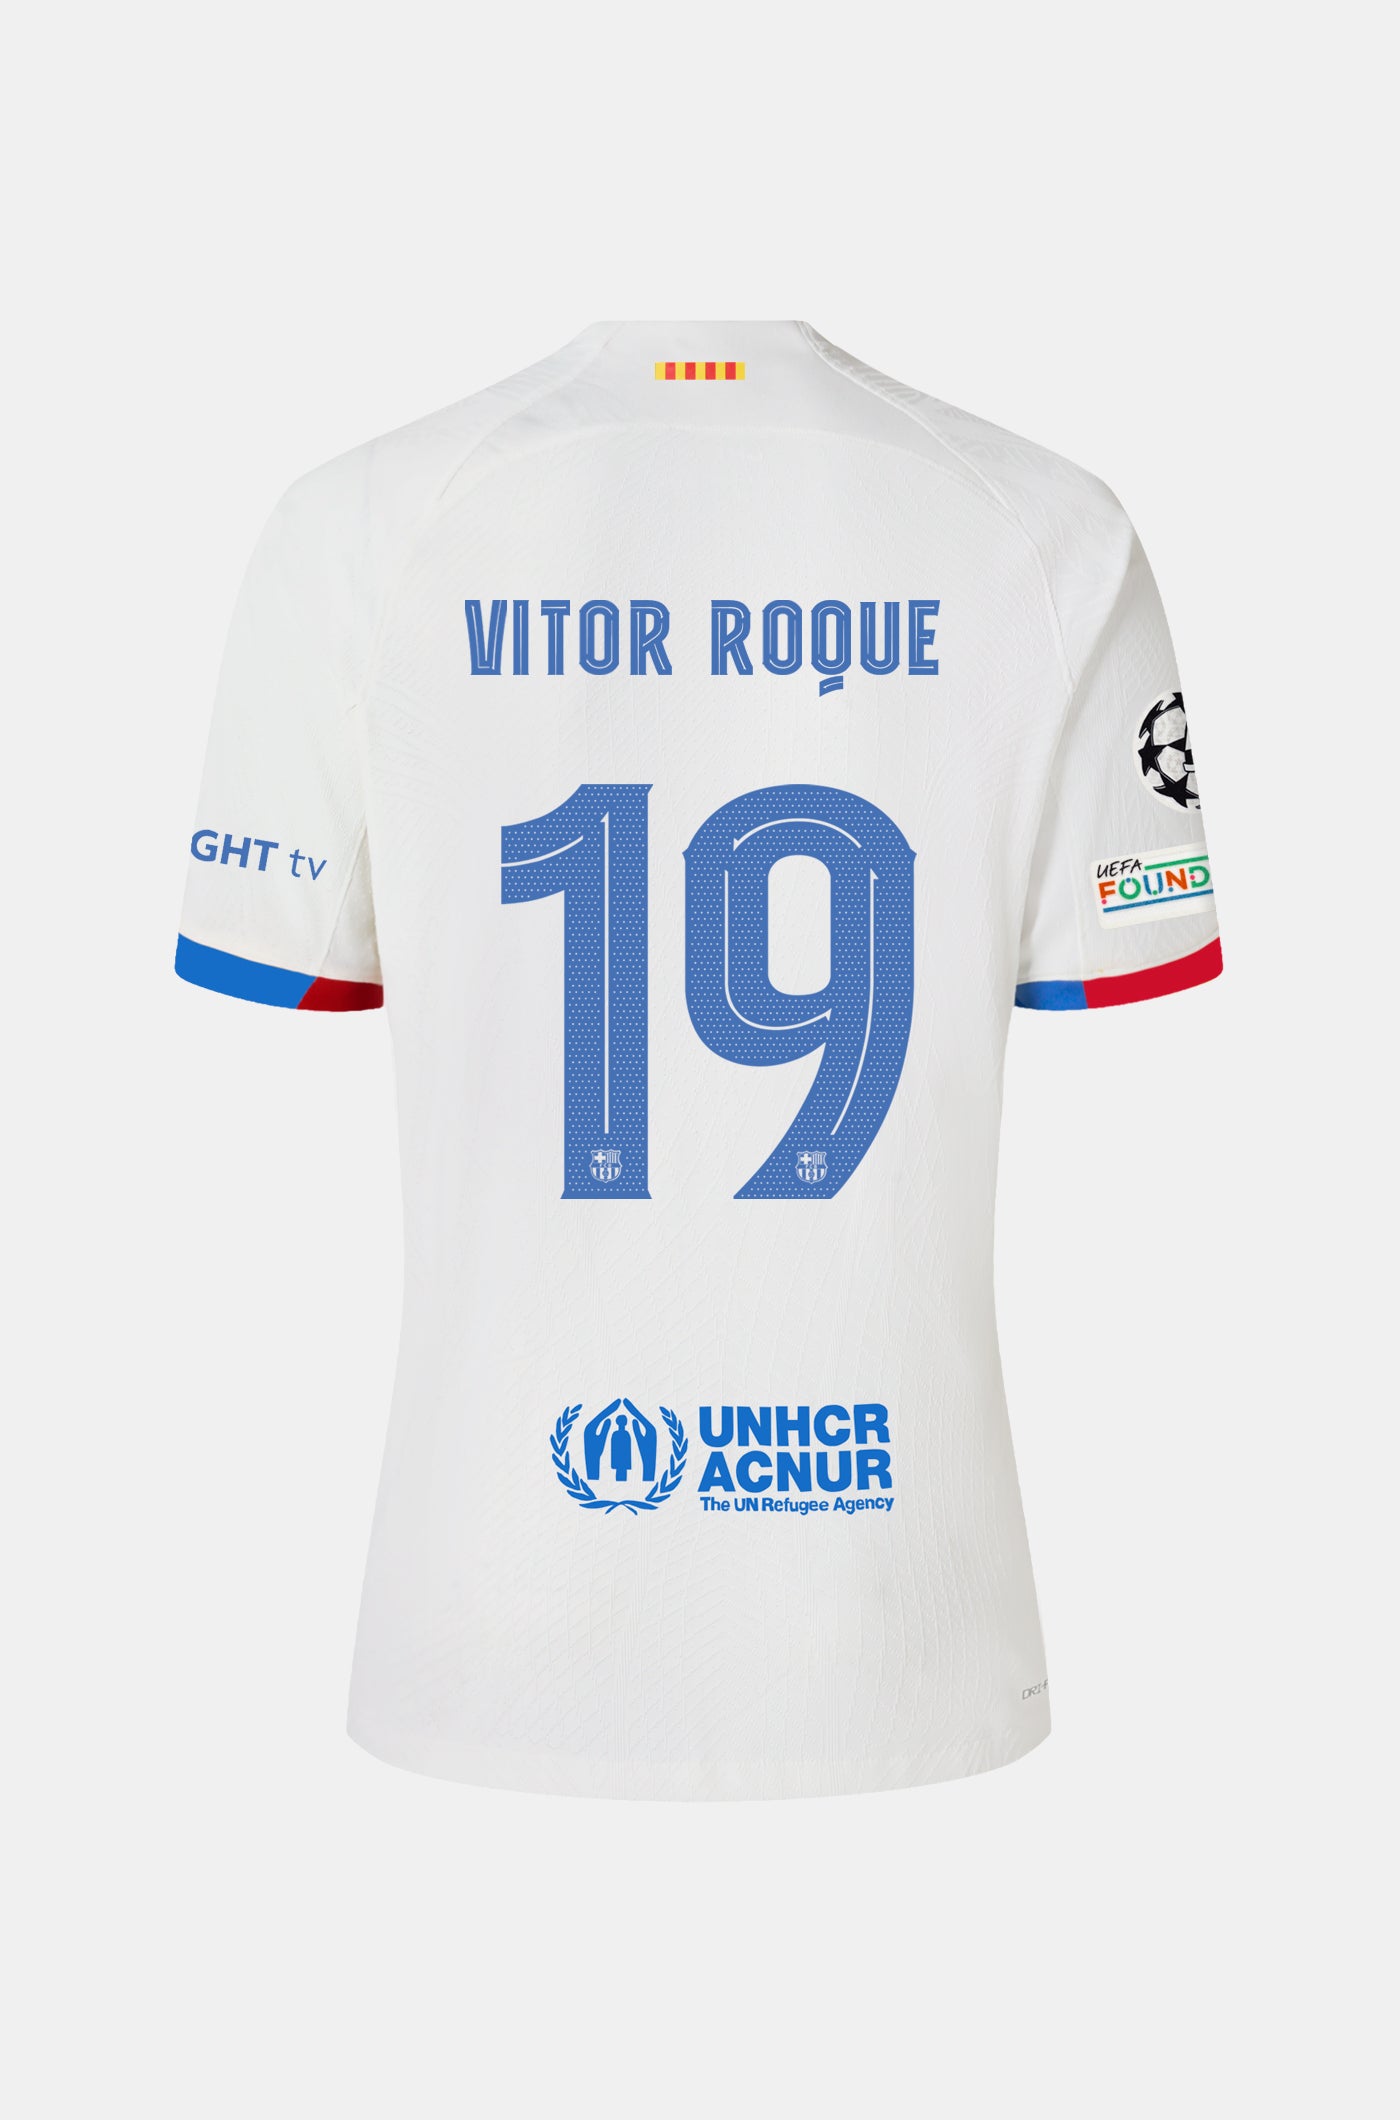 UCL FC Barcelona away shirt 23/24 Player’s Edition - VITOR ROQUE